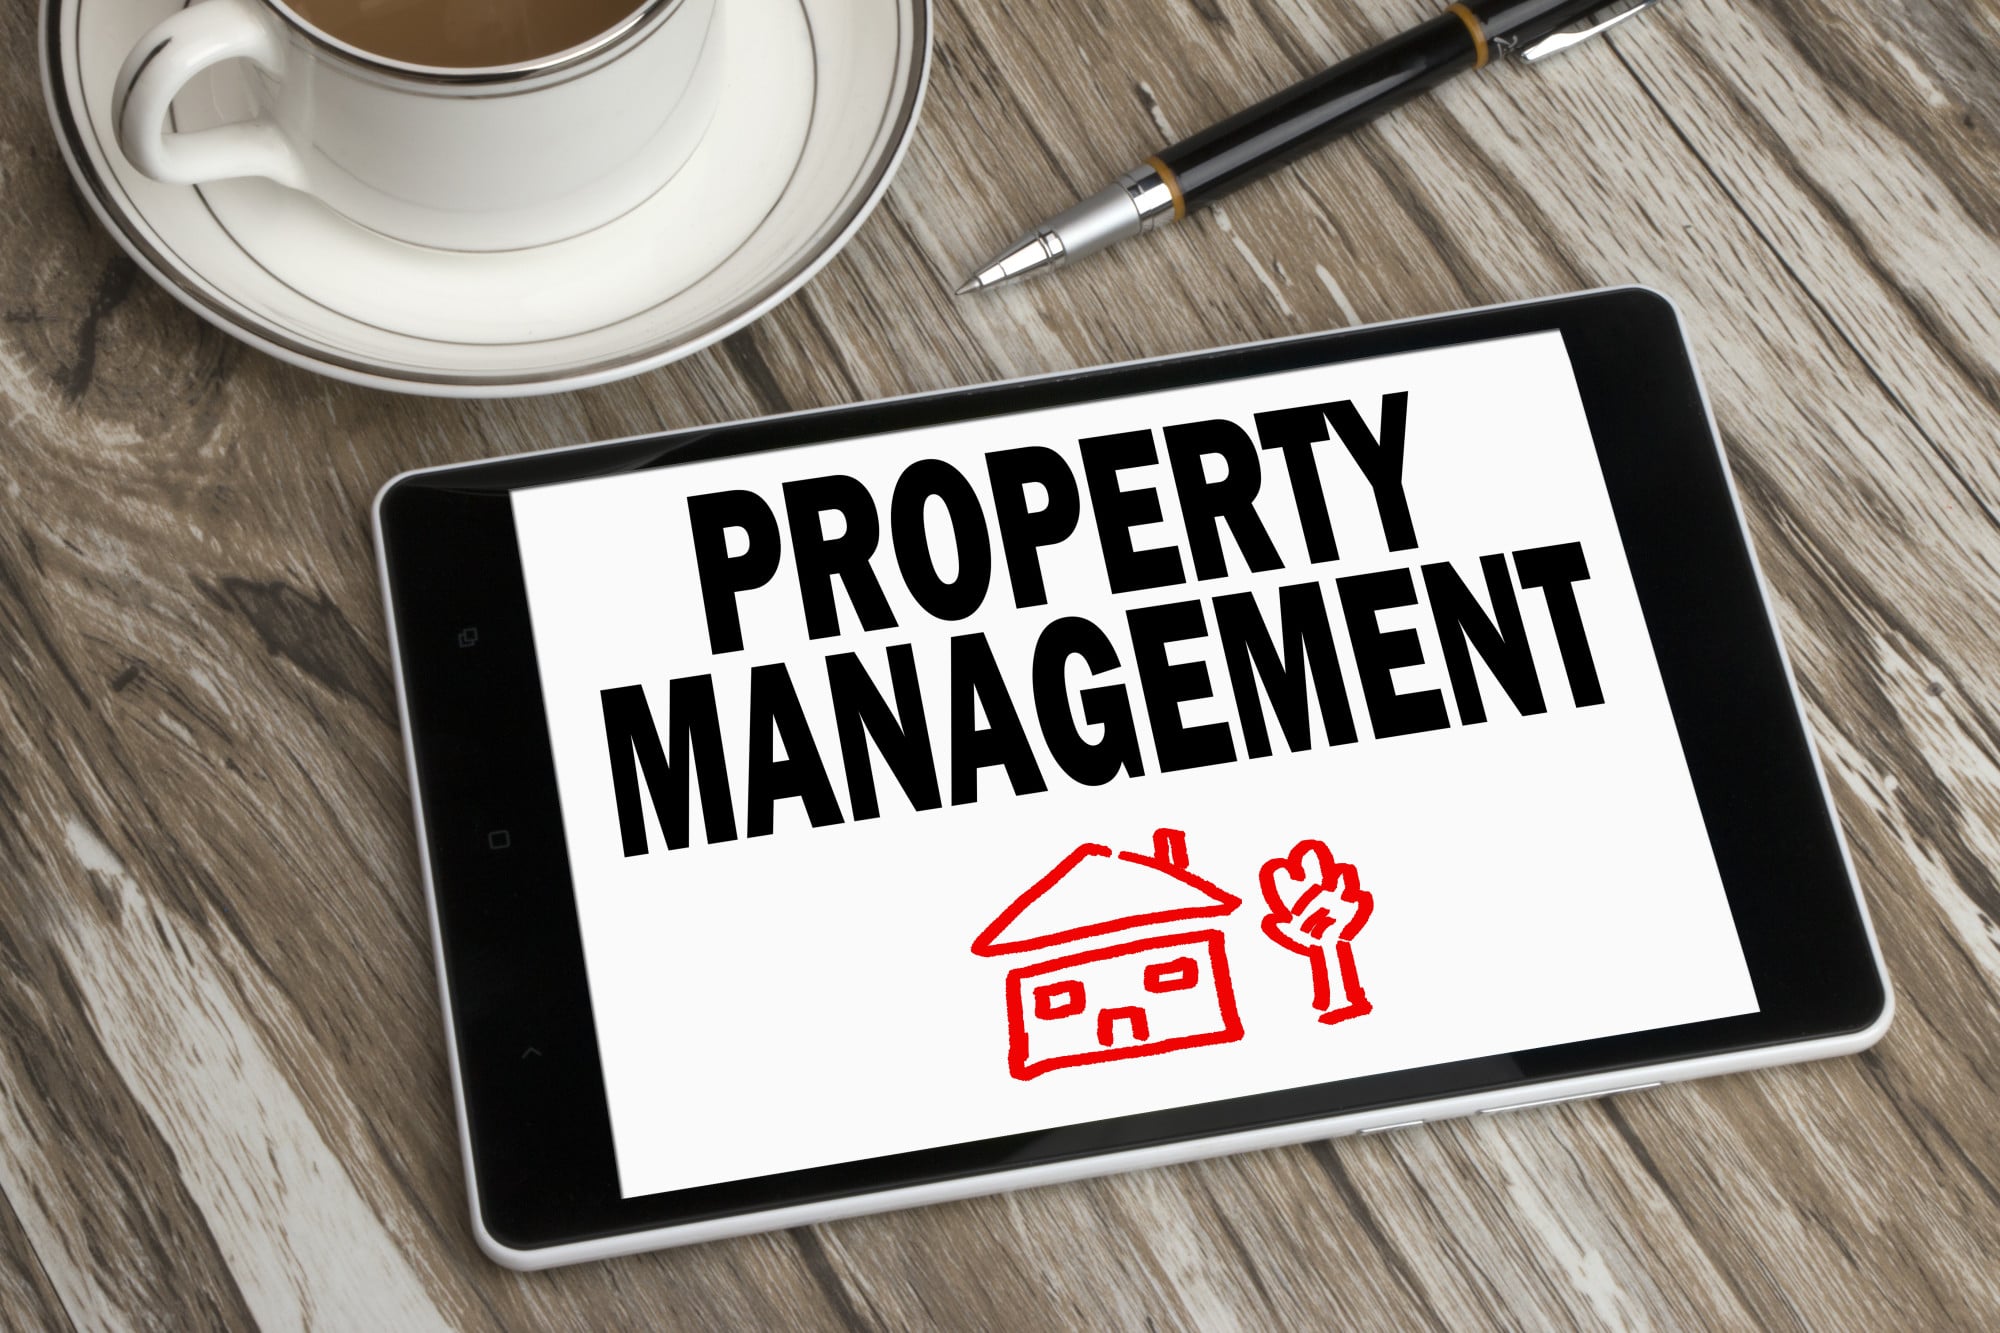 How to Choose the Best Rental Property Management Company